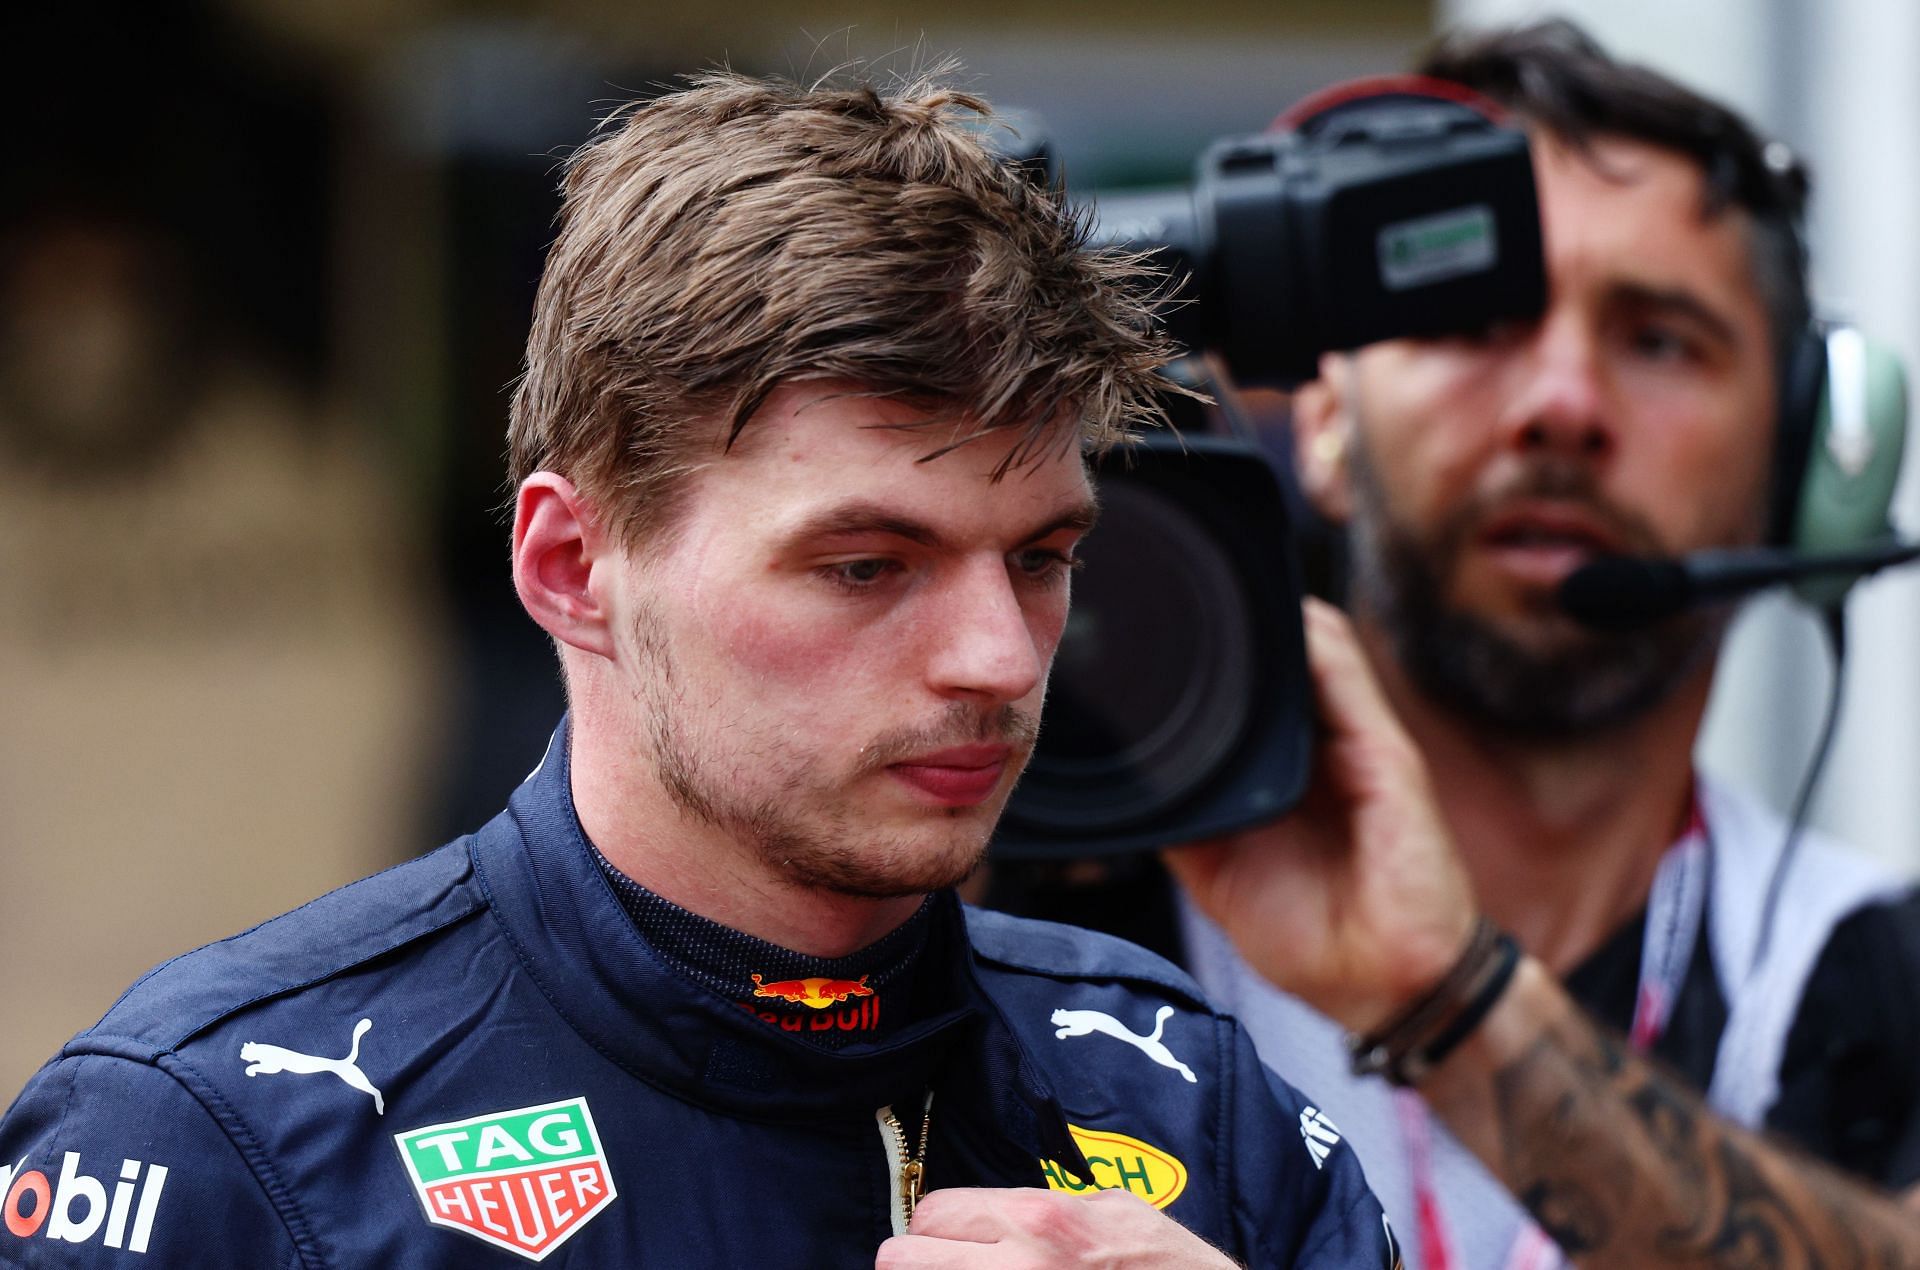 Max Verstappen looks on in parc ferme during qualifying ahead of the F1 Grand Prix of Monaco at Circuit de Monaco on May 28, 2022 in Monte-Carlo, Monaco. (Photo by Clive Rose/Getty Images)